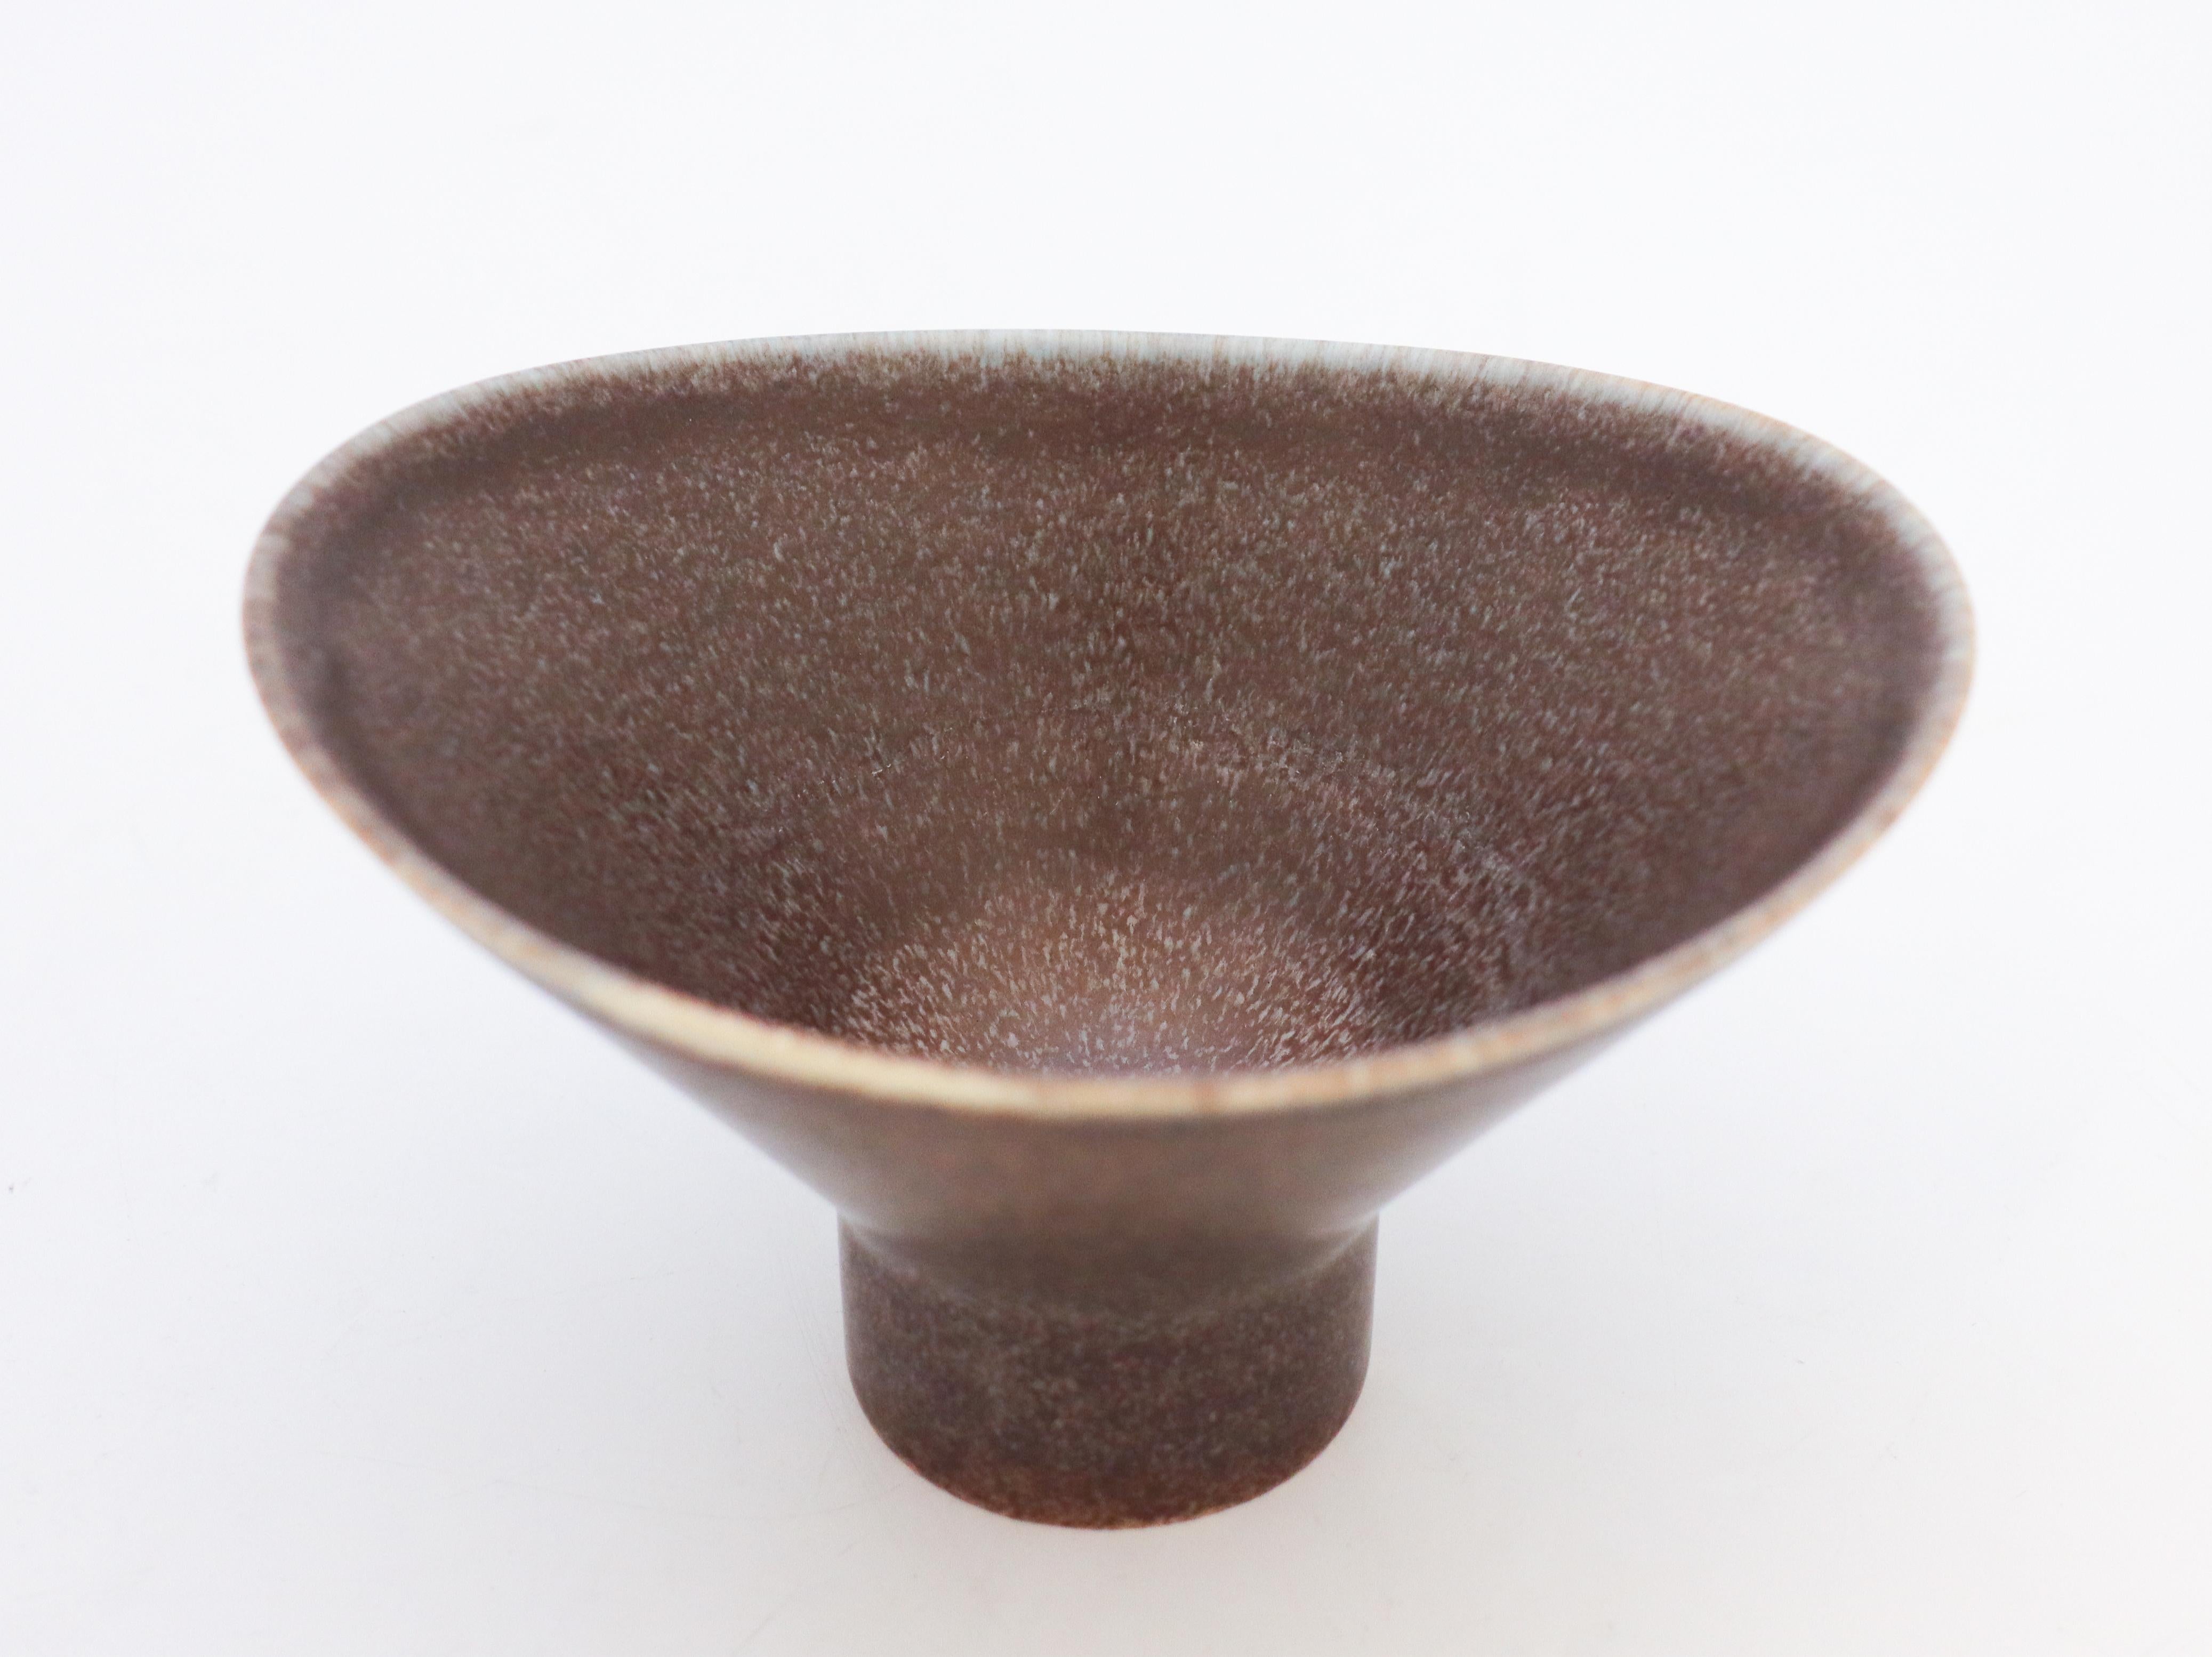 A lovely mid-century bowl in ceramics with a glaze in a purple, brown, blue-toned glaze from Rörstrand, Sweden, designed by Carl-Harry Stålhane. The bowl is marked as 2nd quality and is in excellent condition. 

Carl-Harry Stålhane is one of the